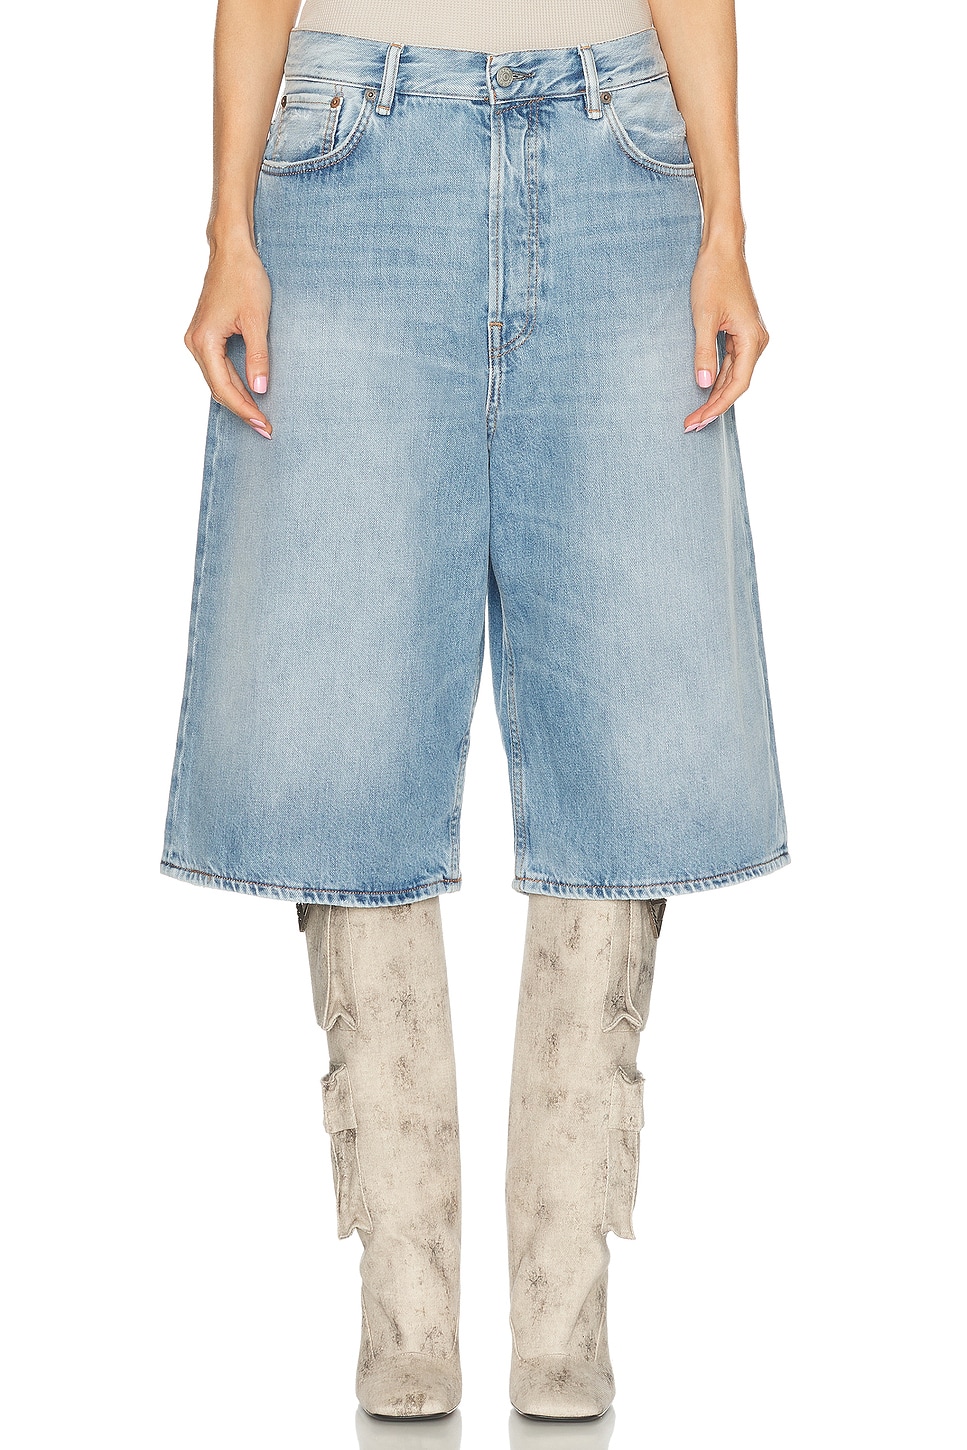 Image 1 of Acne Studios Shorts in Light Blue